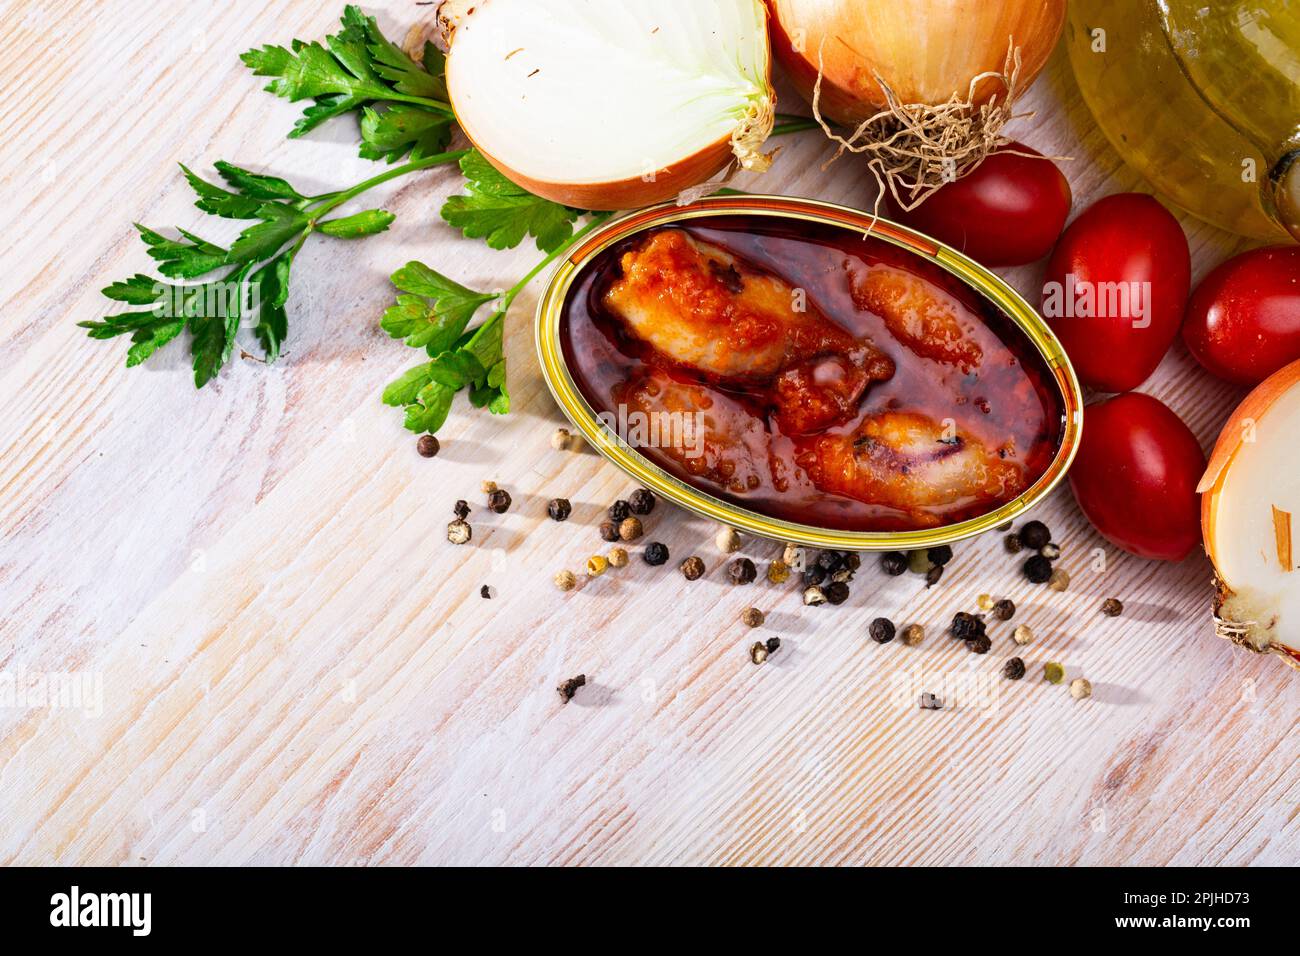 Stuffed squid in tomato sauce on background with greens, tomatoes Stock Photo